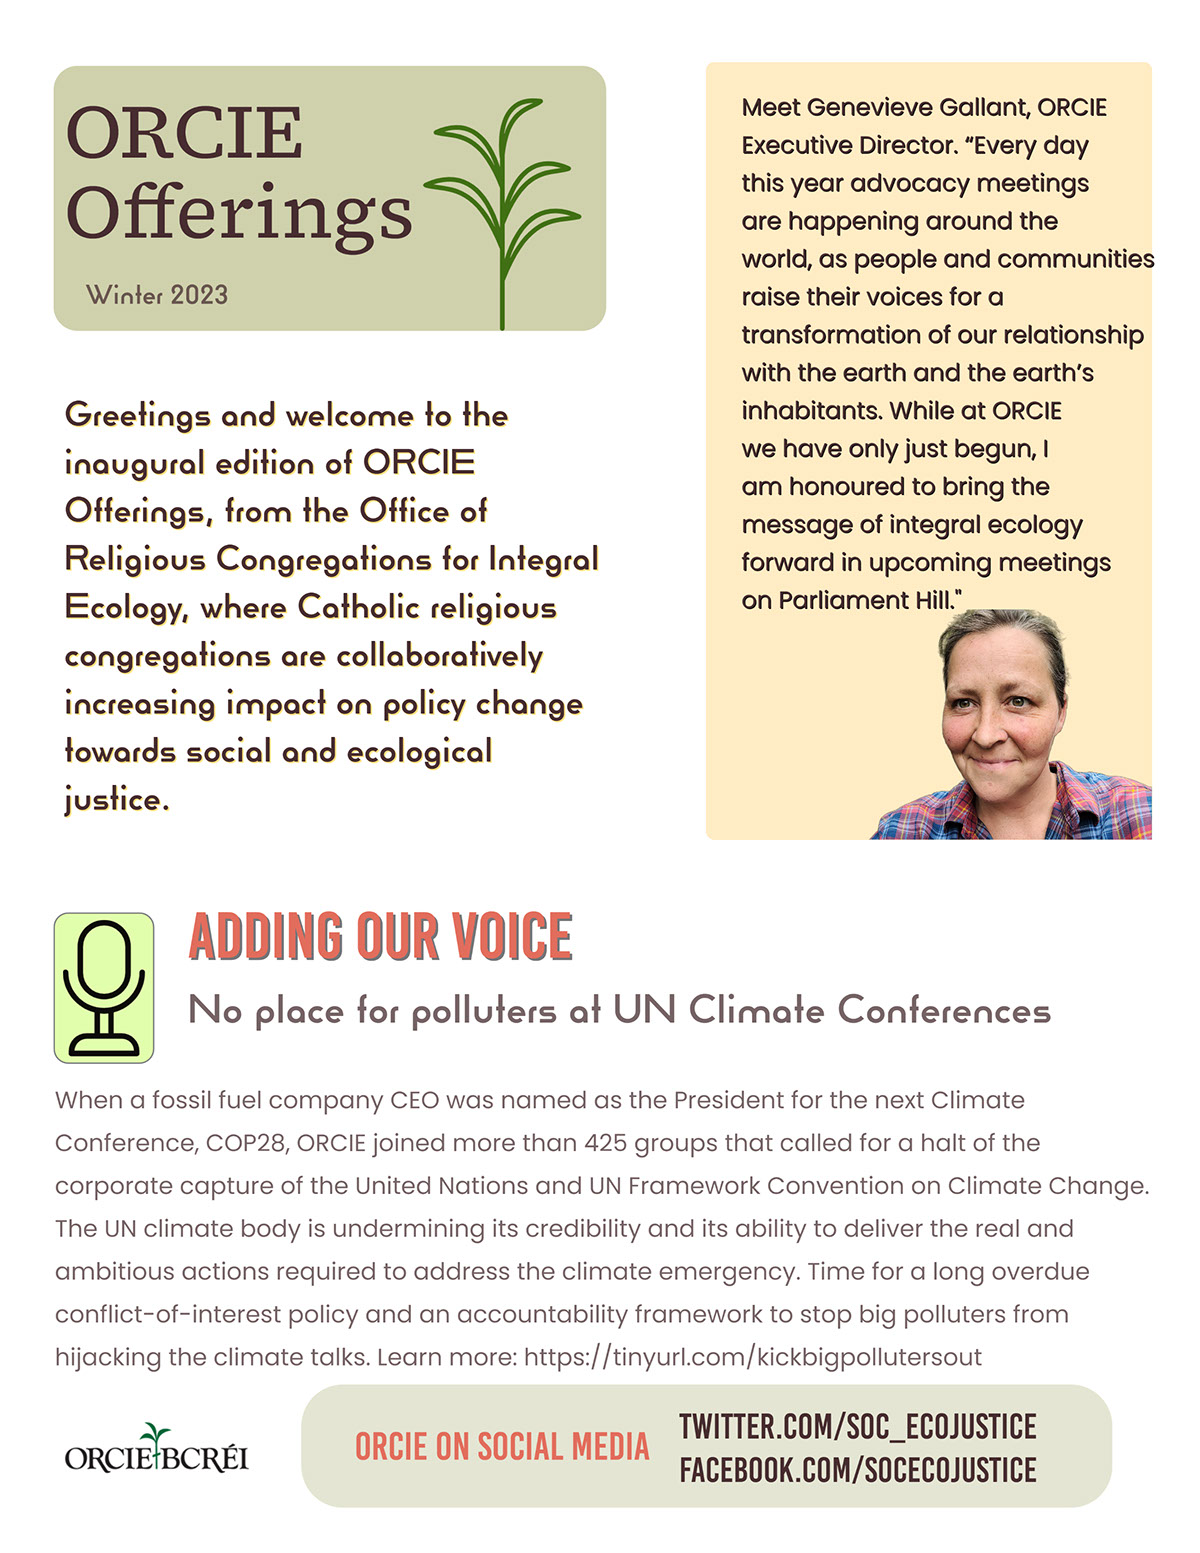 ORCIE Offerings ORCIE Offerings Adding our voice No place for polluters at UN Climate Conferences ORCIE on Social media Greetings and welcome to the inaugural edition of ORCIE Offerings, from the Office of Religious Congregations for Integral Ecology, where Catholic religious congregations are collaboratively increasing impact on policy change towards social and ecological justice. twitter.com/soc_ecojustice facebook.com/socecojustice Winter 2023 When a fossil fuel company CEO was named as the President for the next Climate Conference, COP28, ORCIE joined more than 425 groups that called for a halt of the corporate capture of the United Nations and UN Framework Convention on Climate Change. The UN climate body is undermining its credibility and its ability to deliver the real and ambitious actions required to address the climate emergency. Time for a long overdue conflict-of-interest policy and an accountability framework to stop big polluters from hijacking the climate talks. Learn more: https://tinyurl.com/kickbigpollutersout Meet Genevieve Gallant, ORCIE Executive Director. “Every day this year advocacy meetings are happening around the world, as people and communities raise their voices for a transformation of our relationship with the earth and the earth’s inhabitants. While at ORCIE we have only just begun, I am honoured to bring the message of integral ecology forward in upcoming meetings on Parliament Hill."